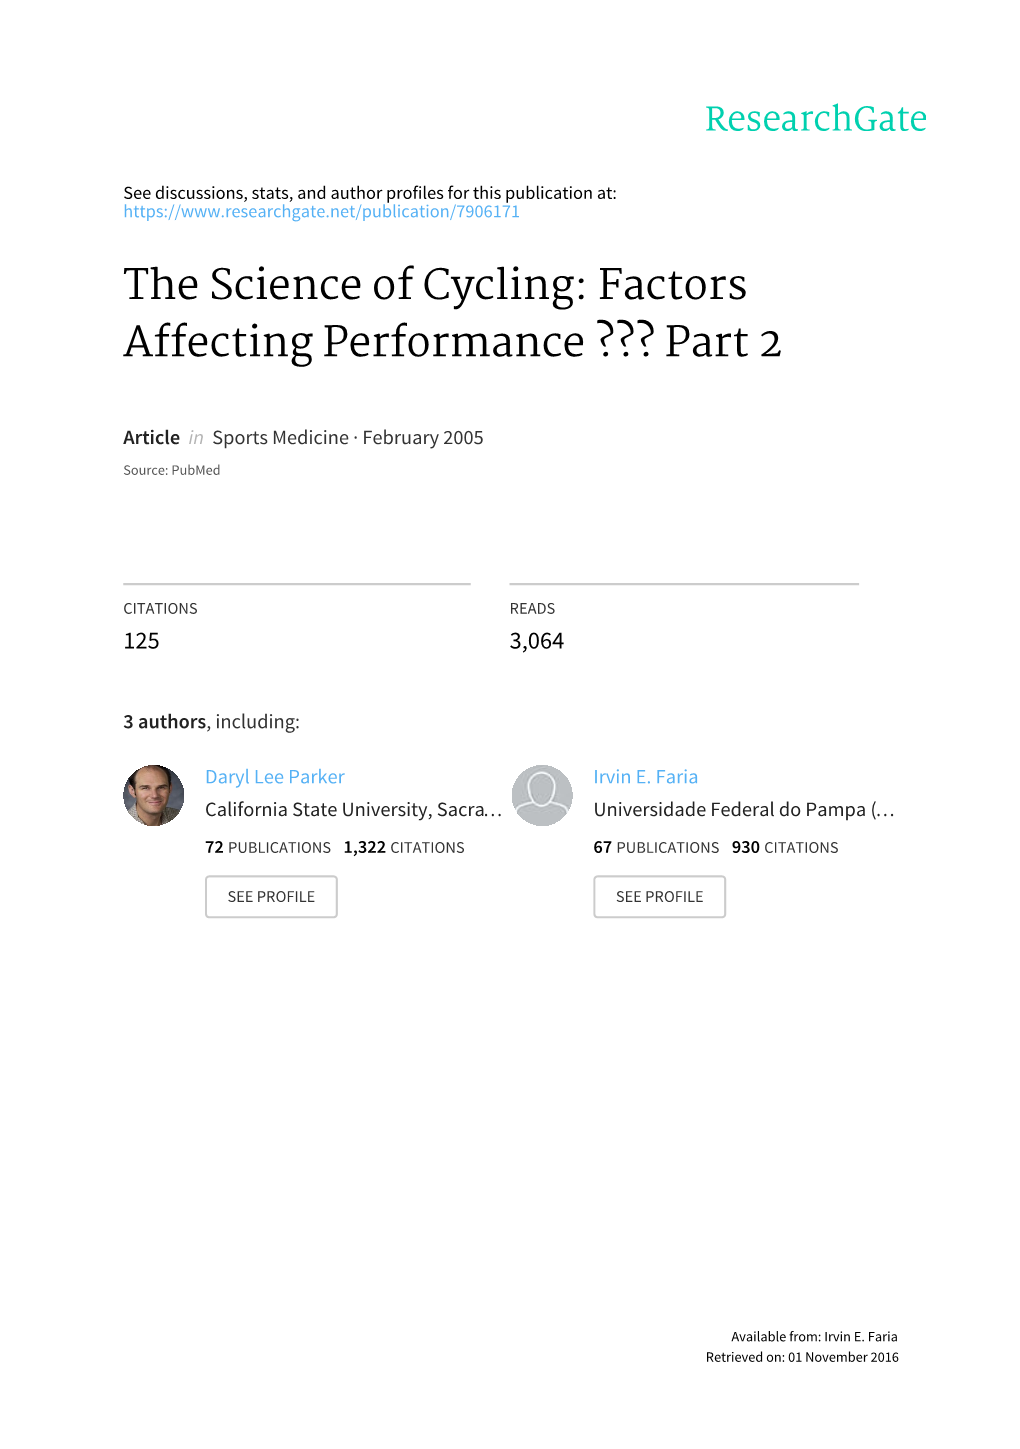 The Science of Cycling: Factors Affecting Performance ??? Part 2